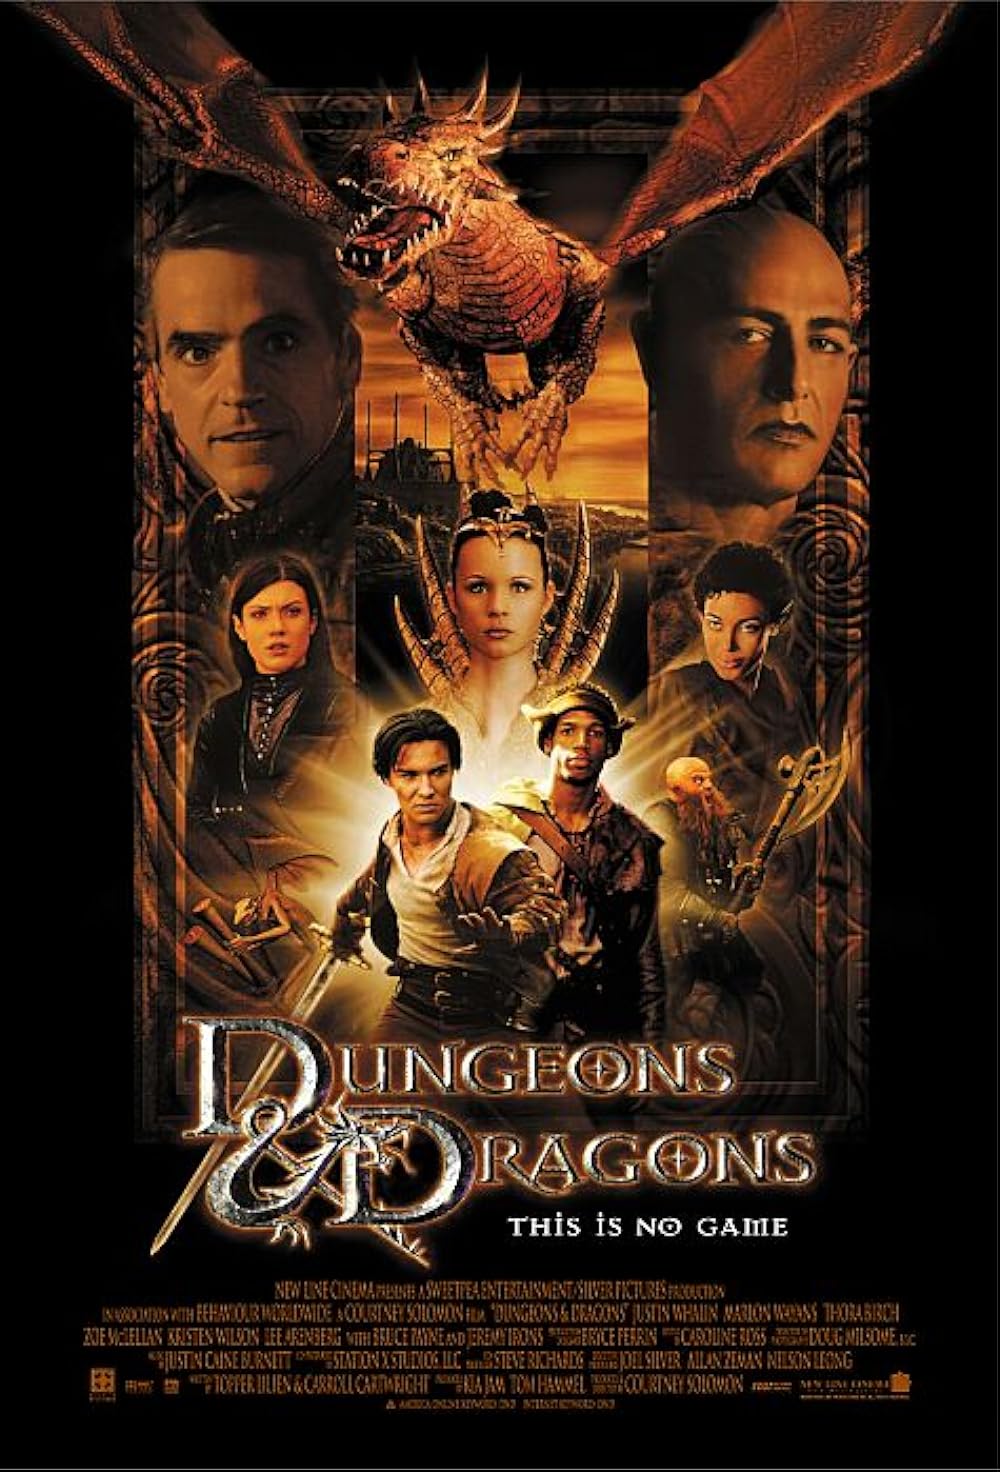 FULL MOVIE: Dungeons & Dragons (2000)